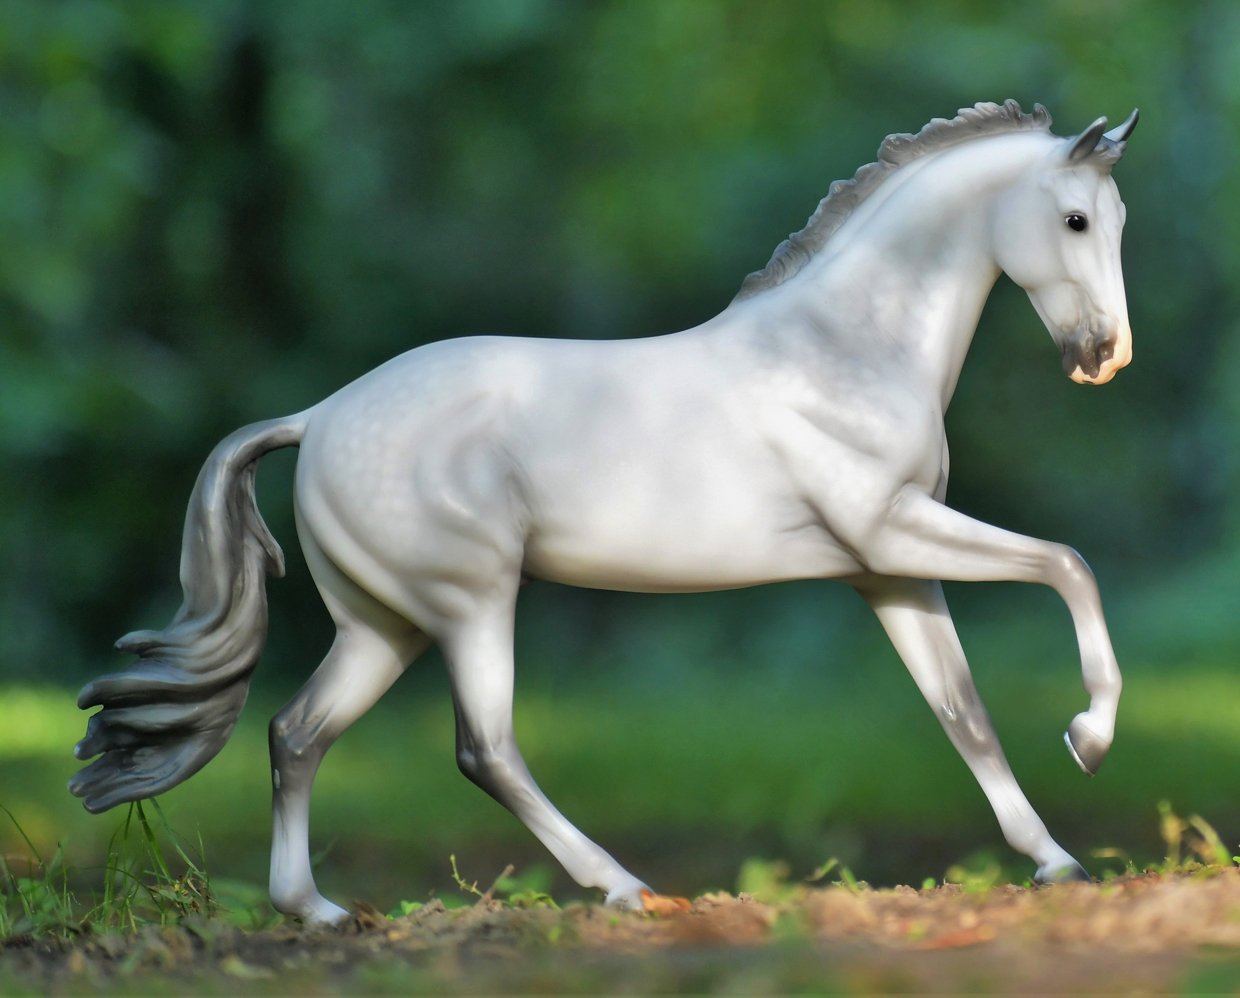 Breyer Traditional Catch Me Model Horse